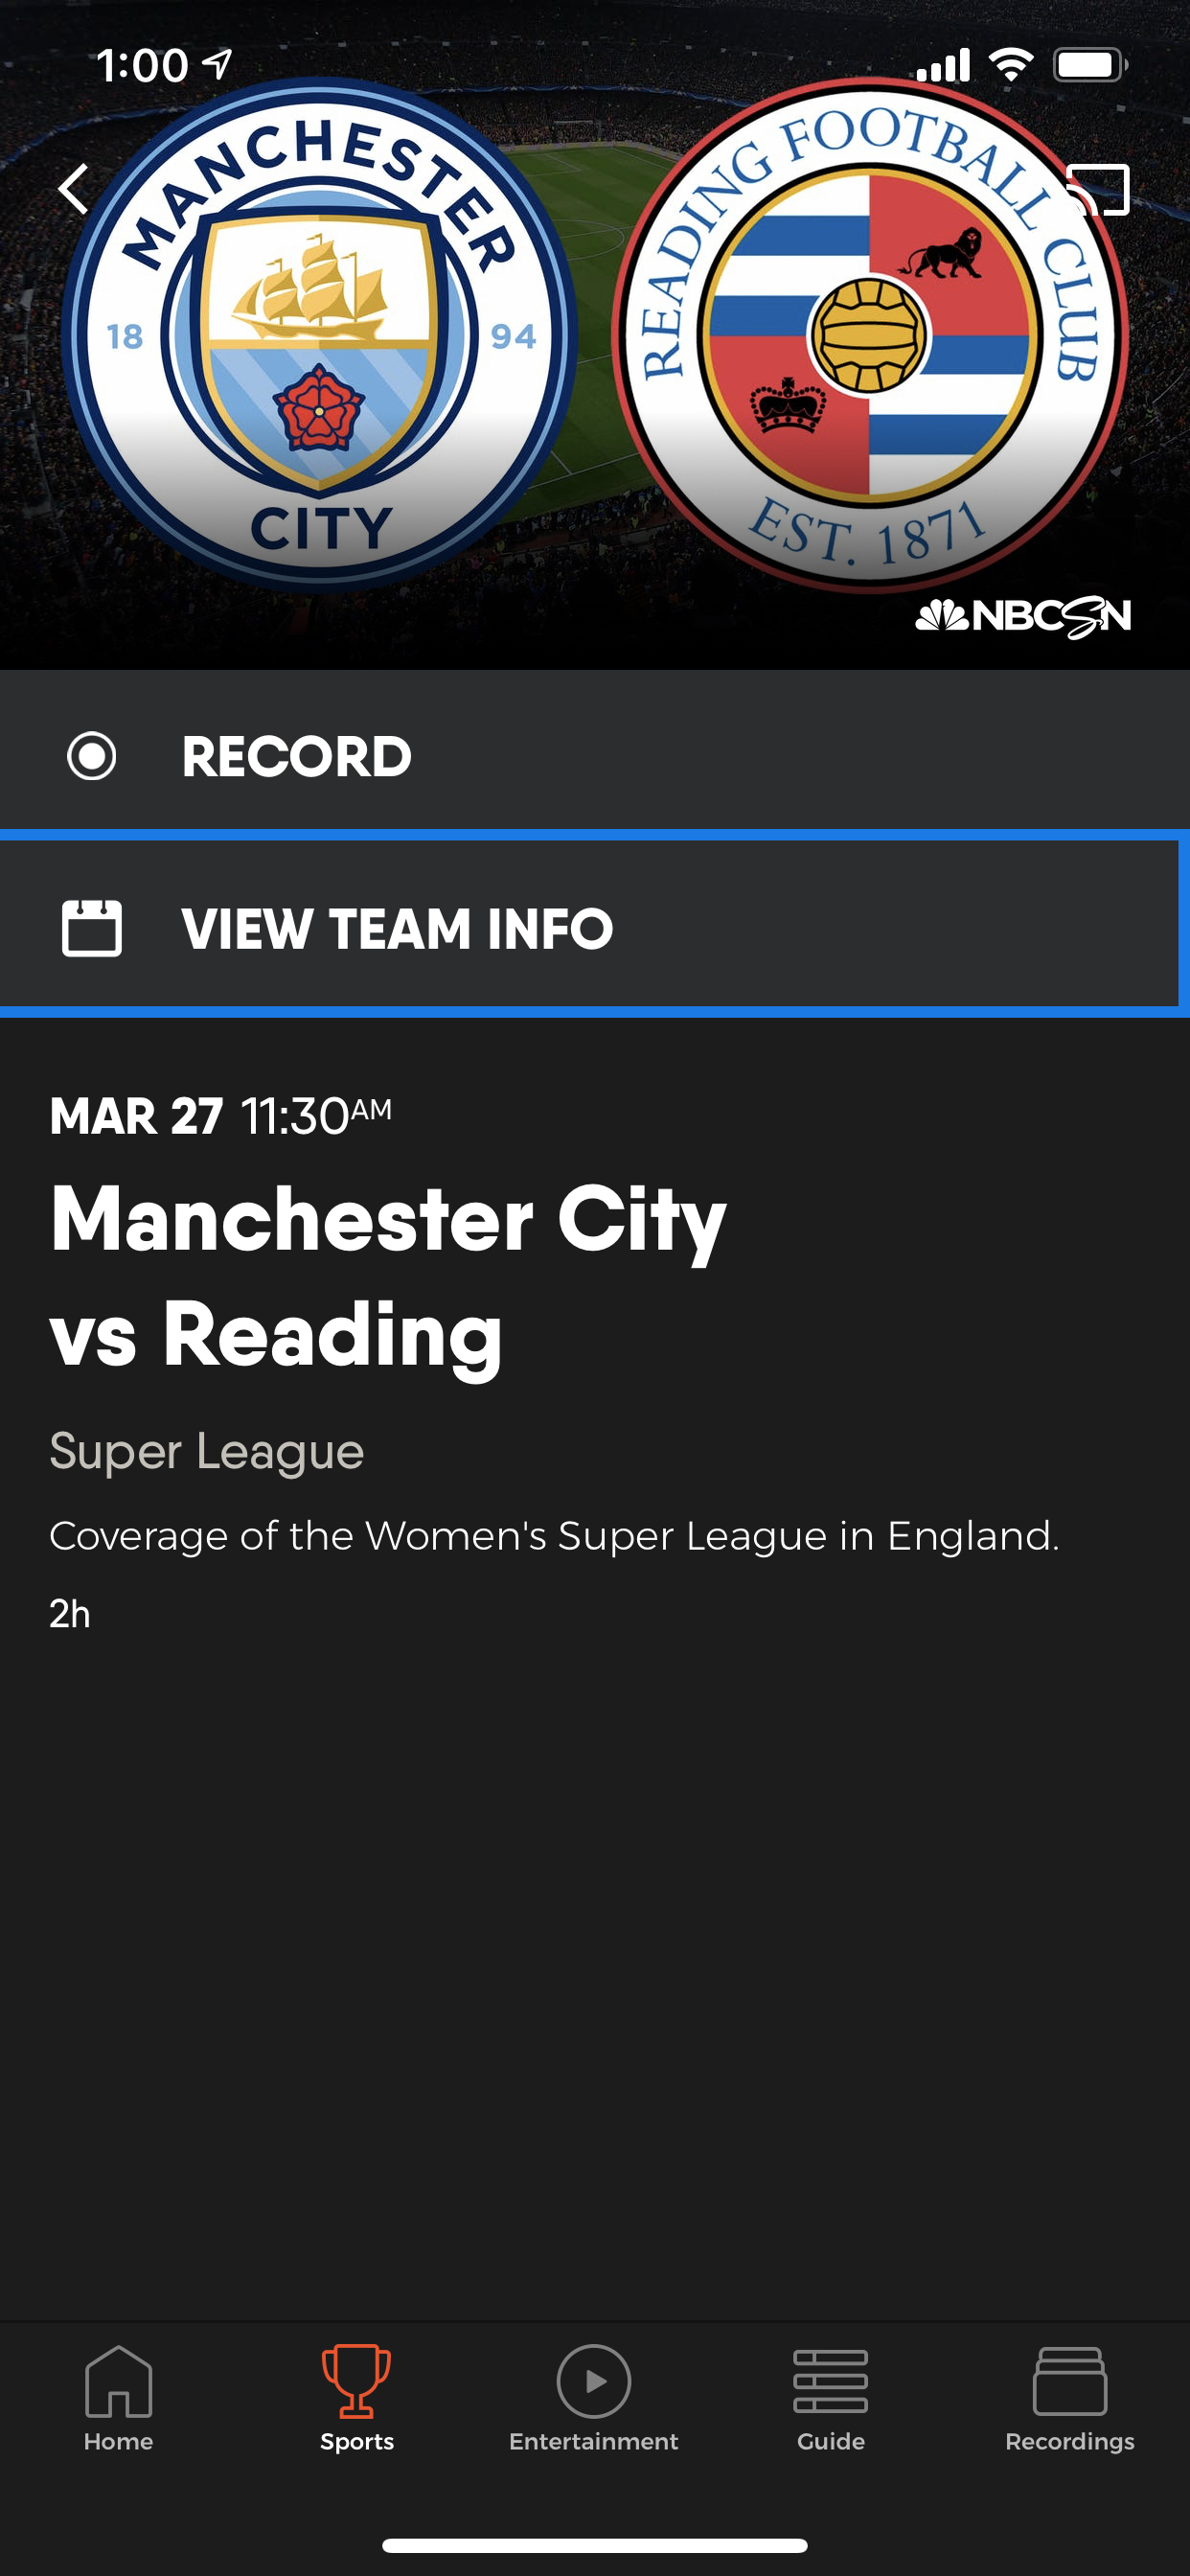 Program information screen for an upcoming soccer match on the FuboTV app for iOS with TEAM INFO button highlighted